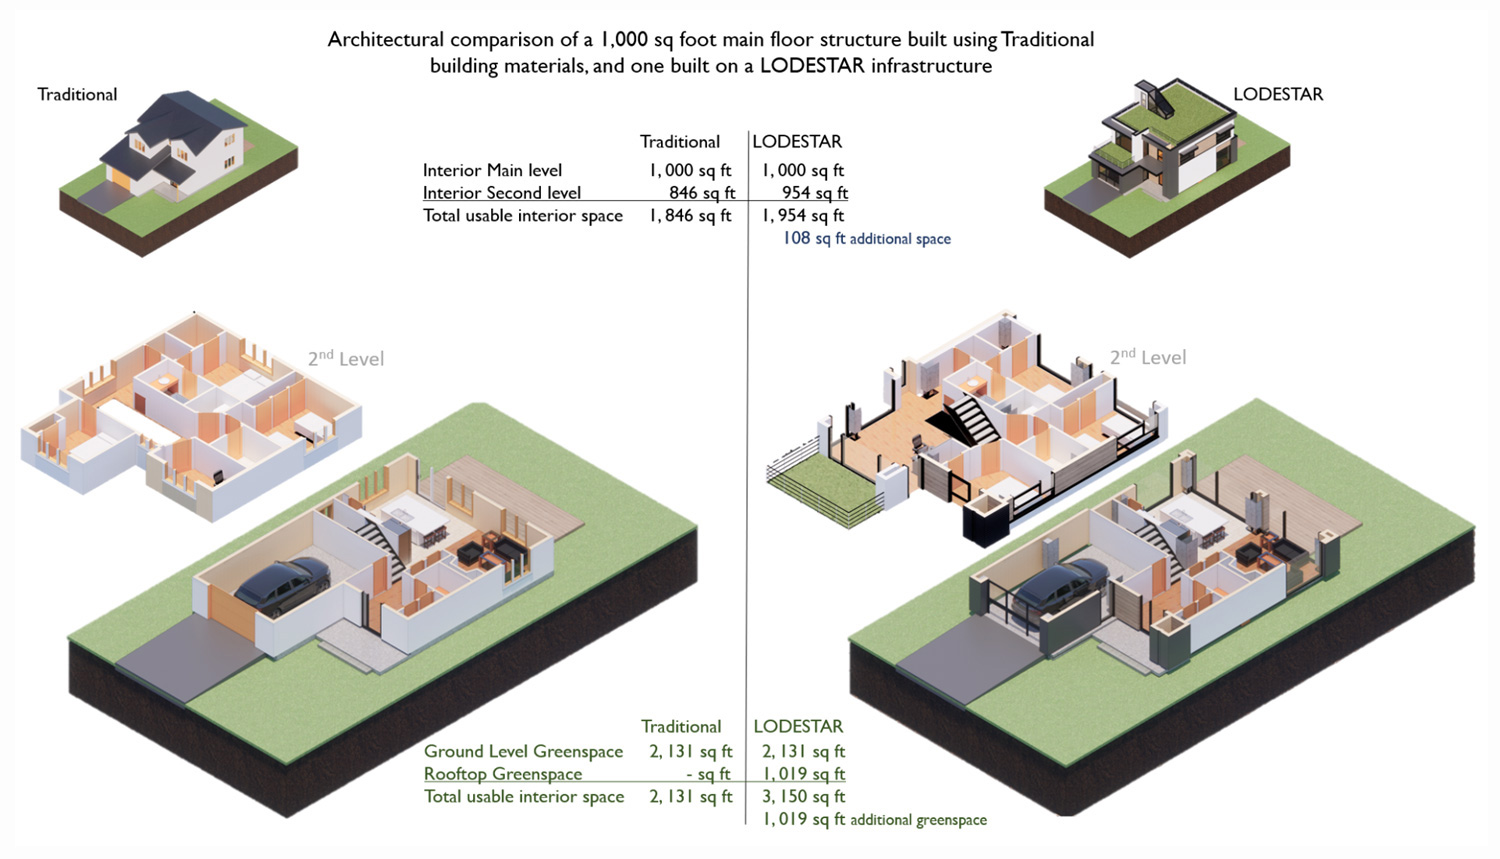 floor-plans-14-two-story-traditional-vs-Lodestar-comparison